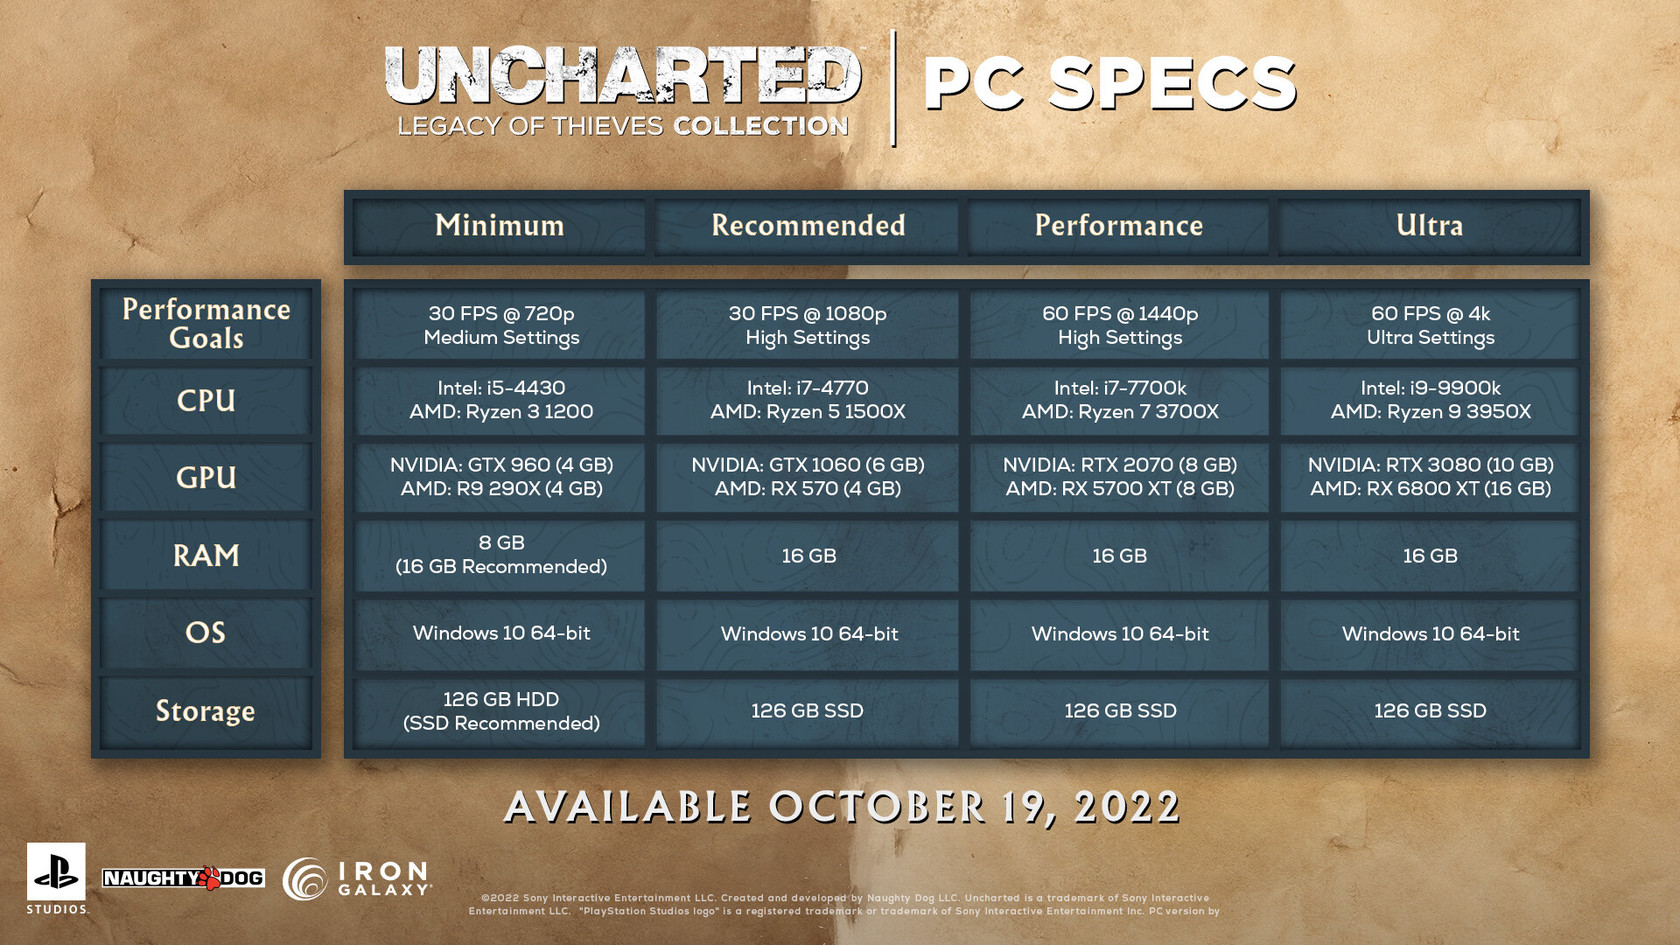 Will Sony also bring the Nathan Drake Collection to PC alongside the  Uncharted Legacy of Thieves Collection?